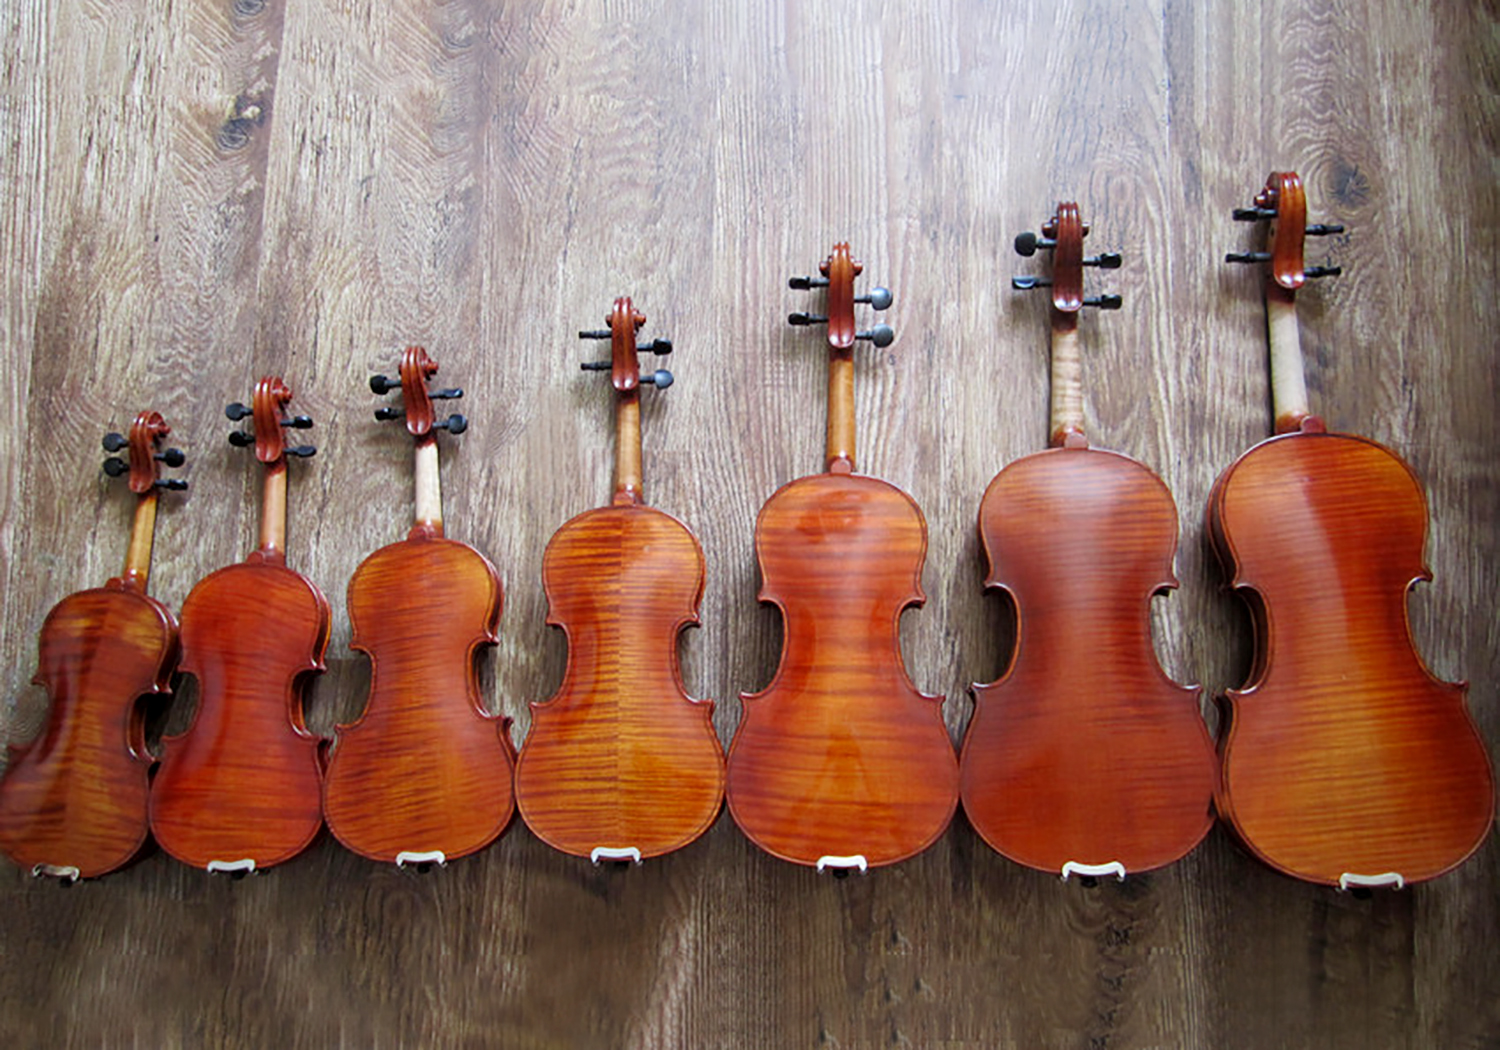 row of violins lined up small to large on a hardwood plank floor